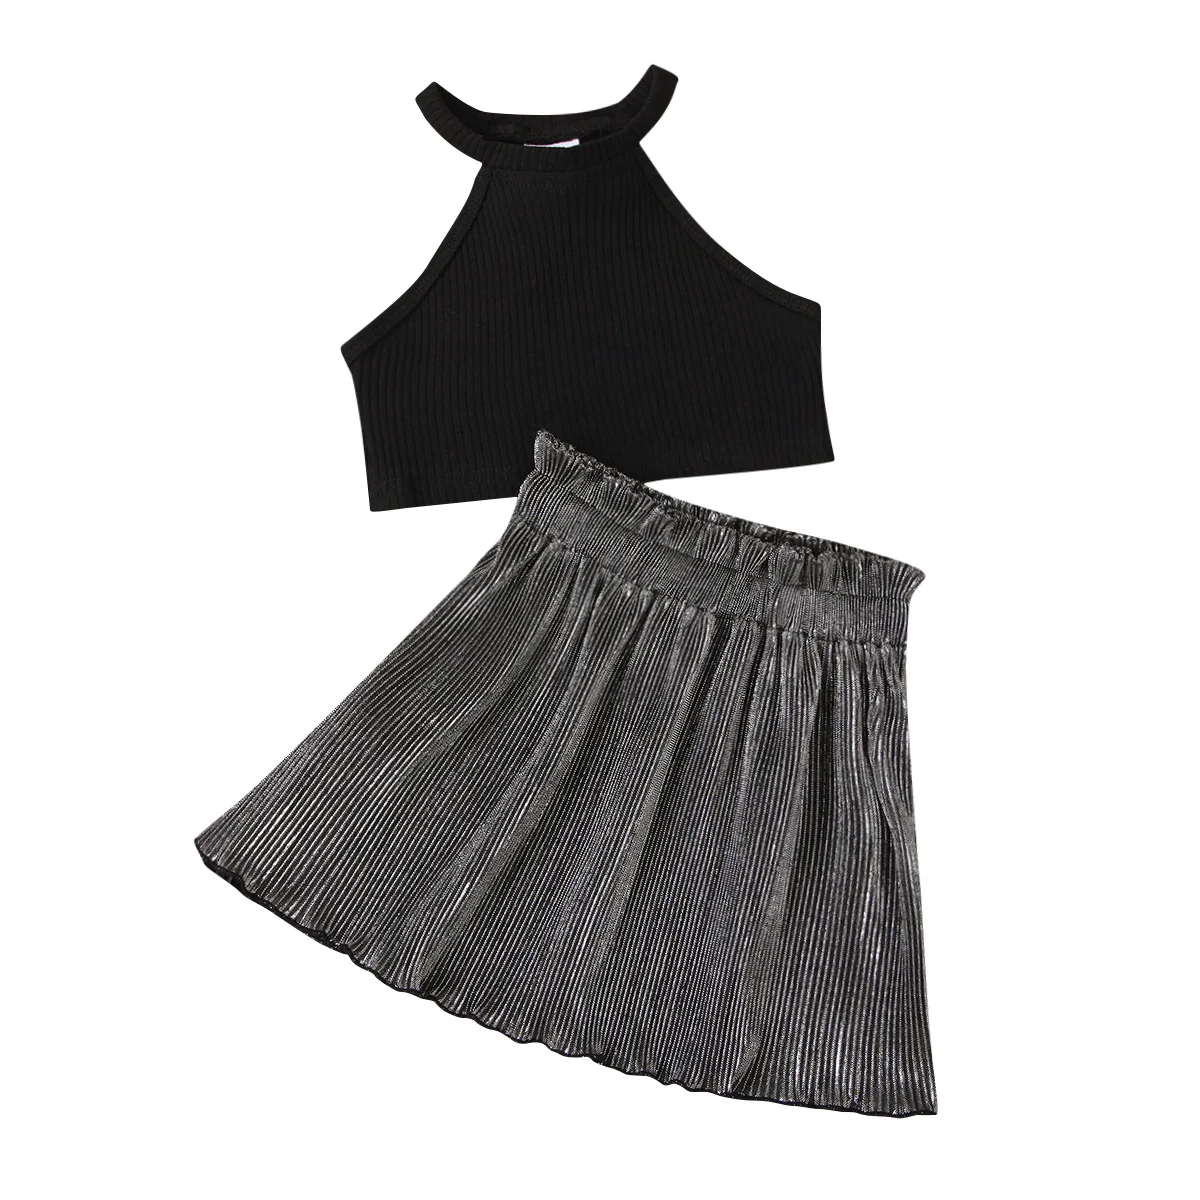 European and American Kids Baby Girls Clothing Solid Pit Strip Halter Neck Crop Top + Silver Lace Waist Pleated Skirt Suit 2pcs | Детская